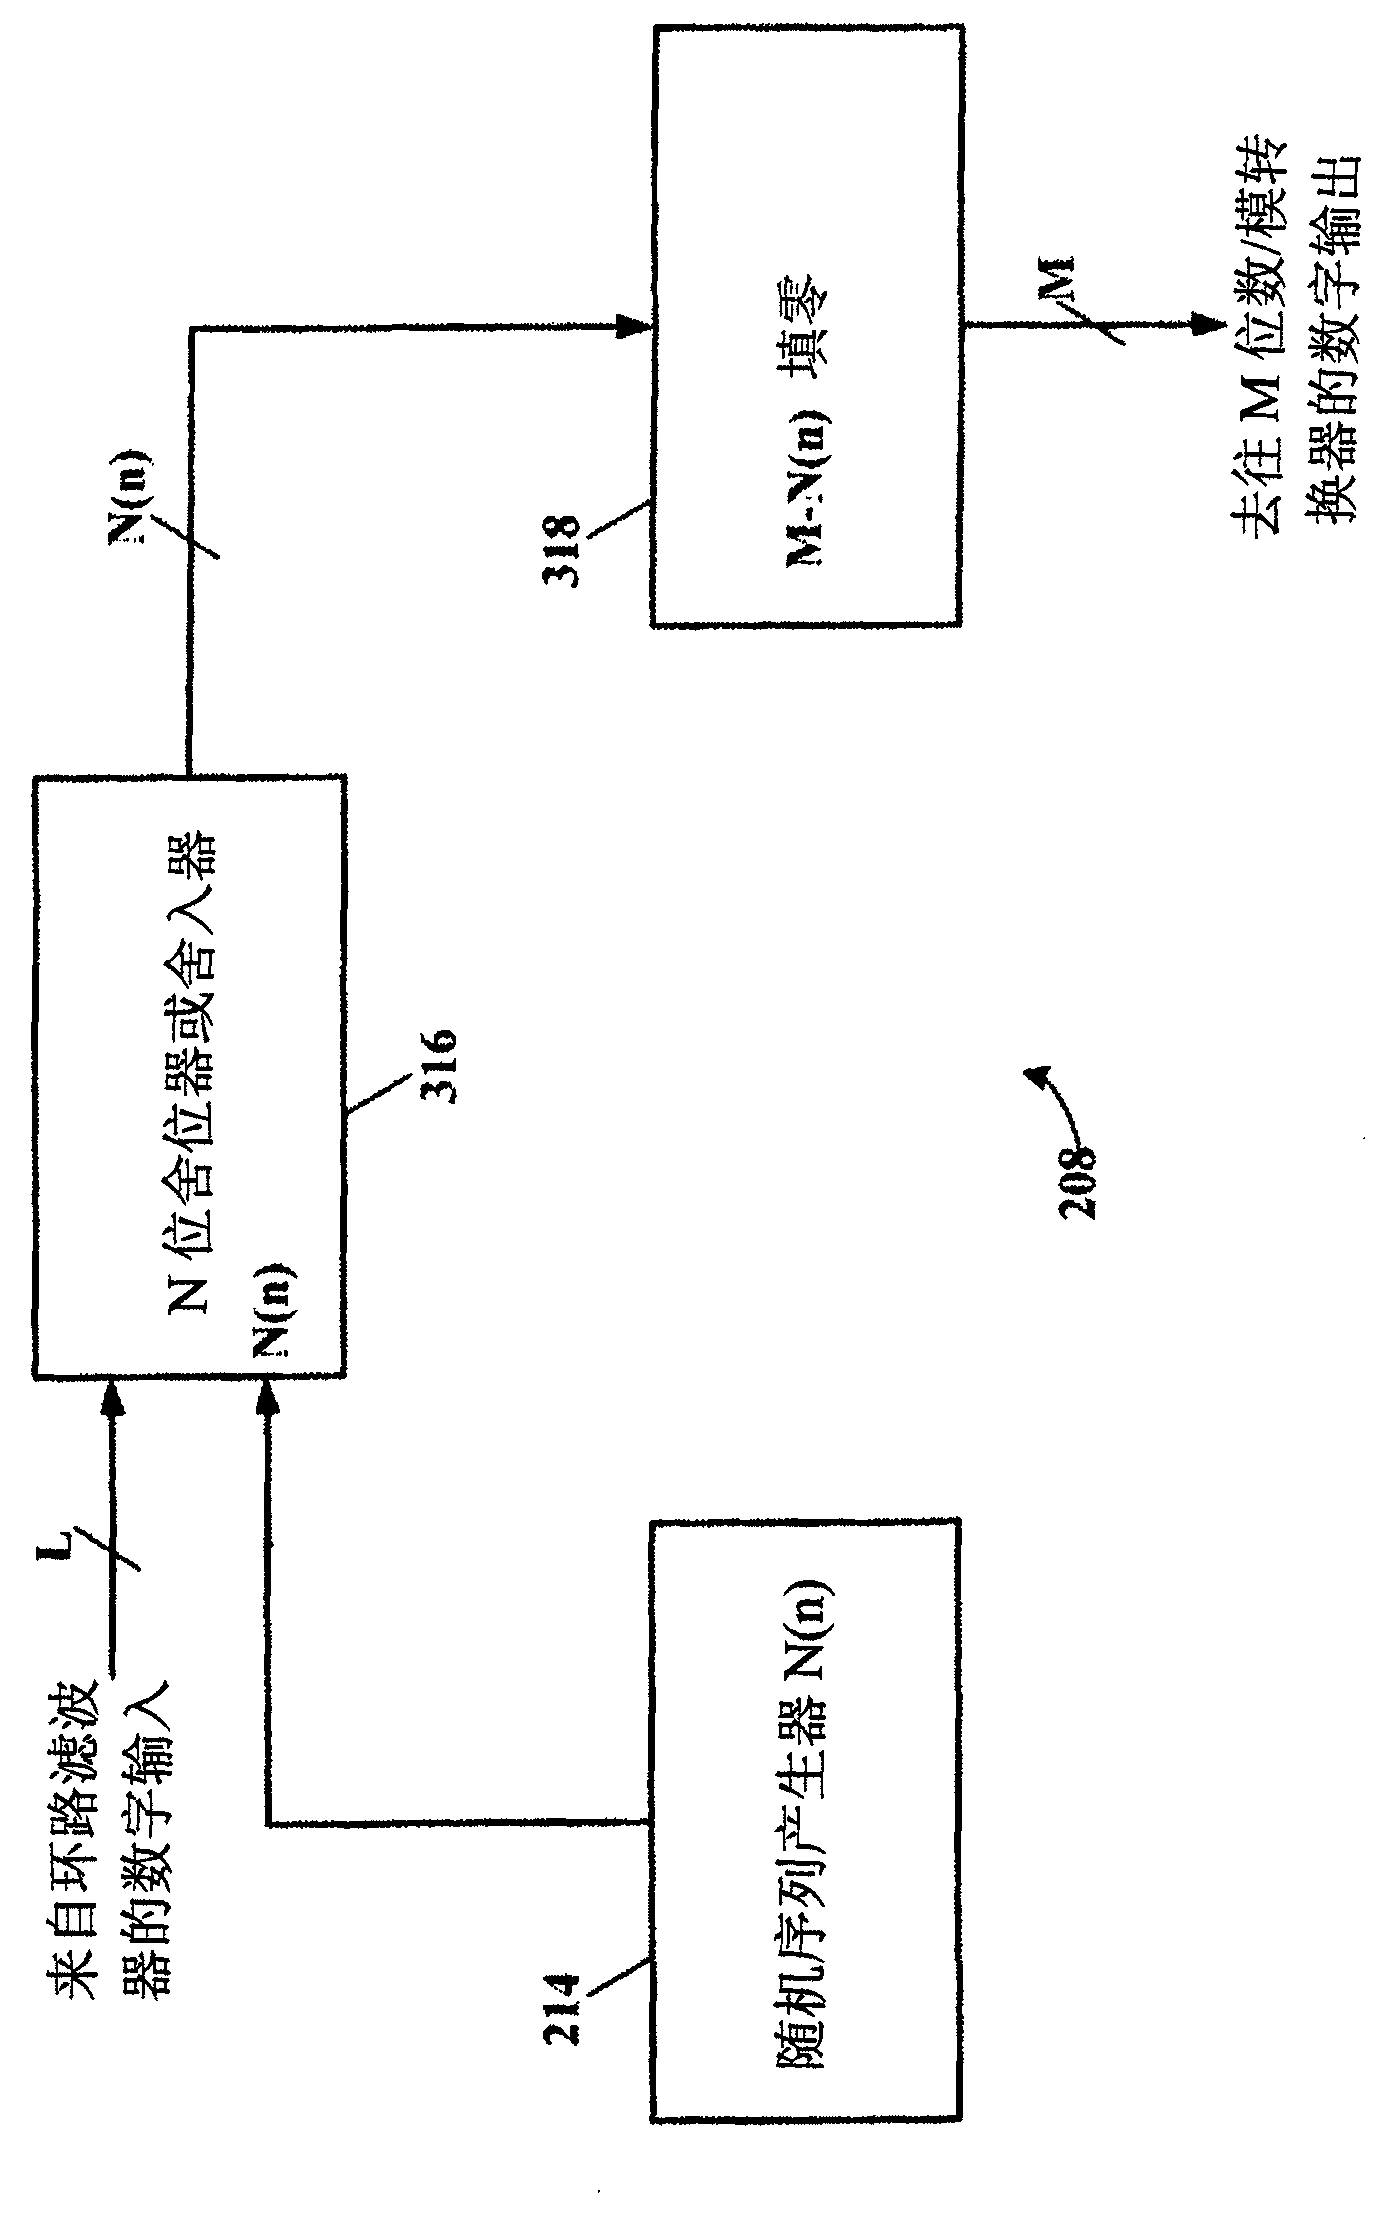 Method and apparatus for dithering in multi-bit sigma-delta digital-to-analog converters